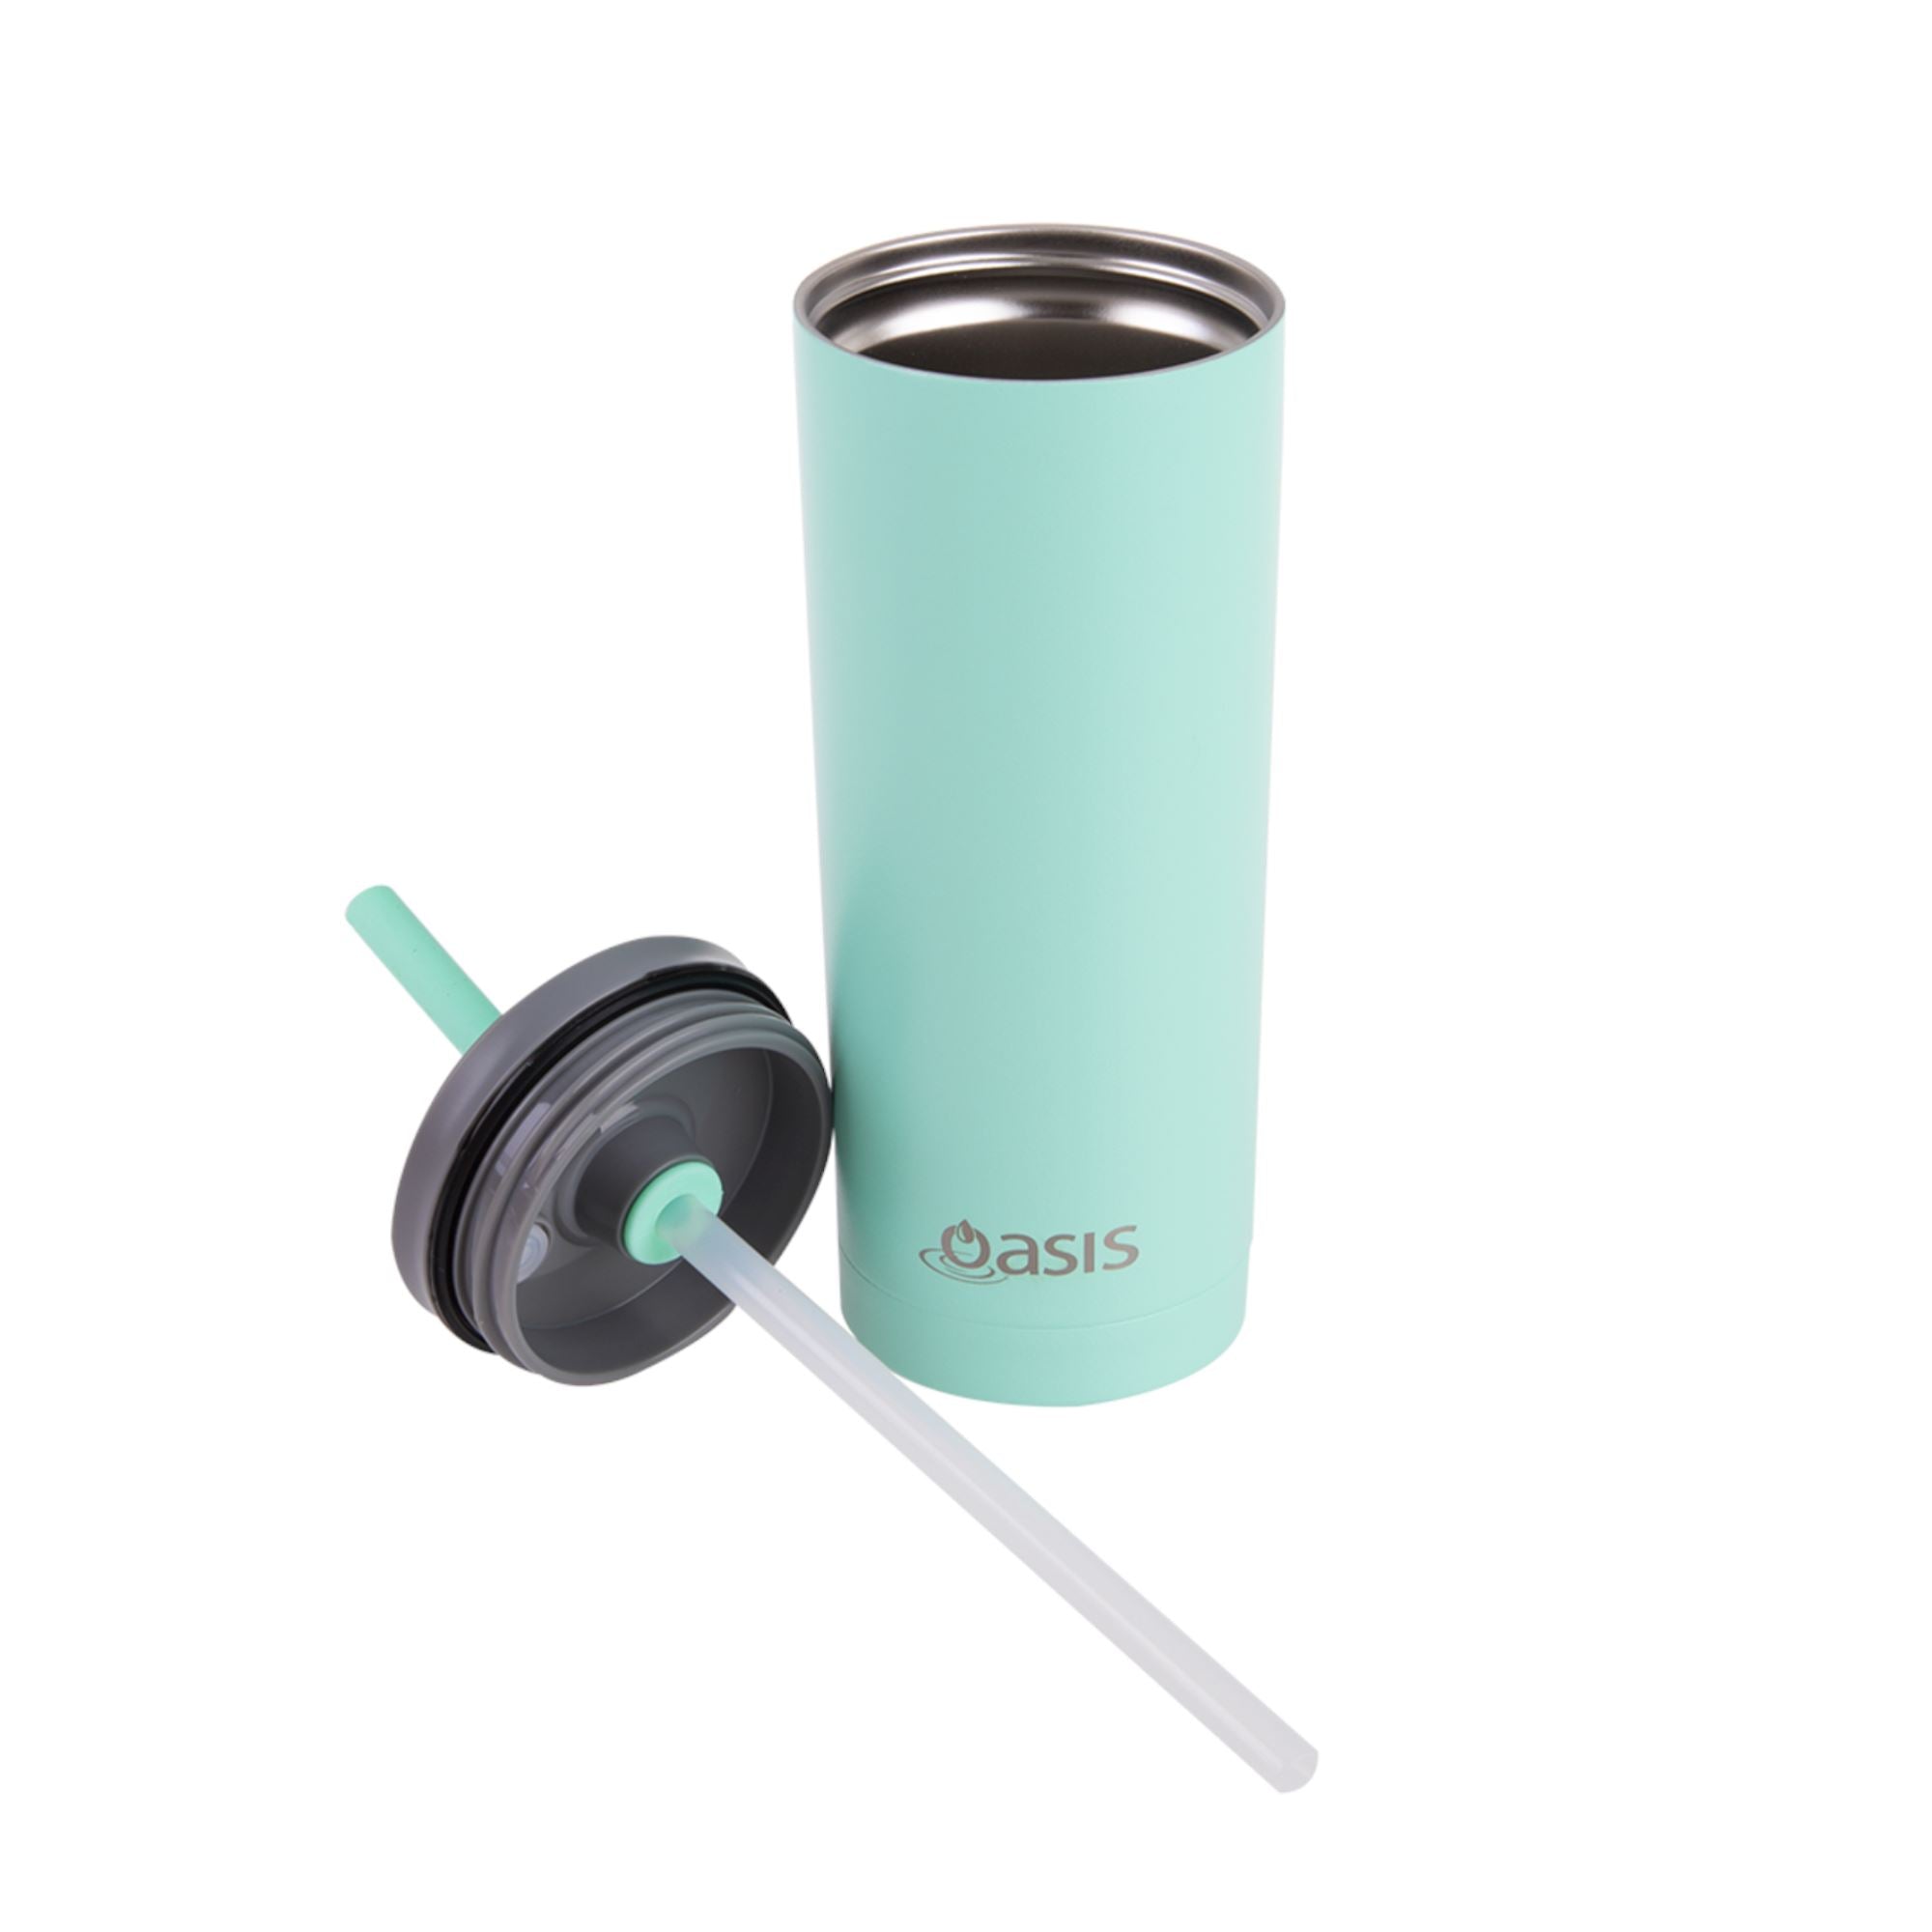 Insulated Super Sipper Mint Green 600ml Insulated Tumbler Oasis 